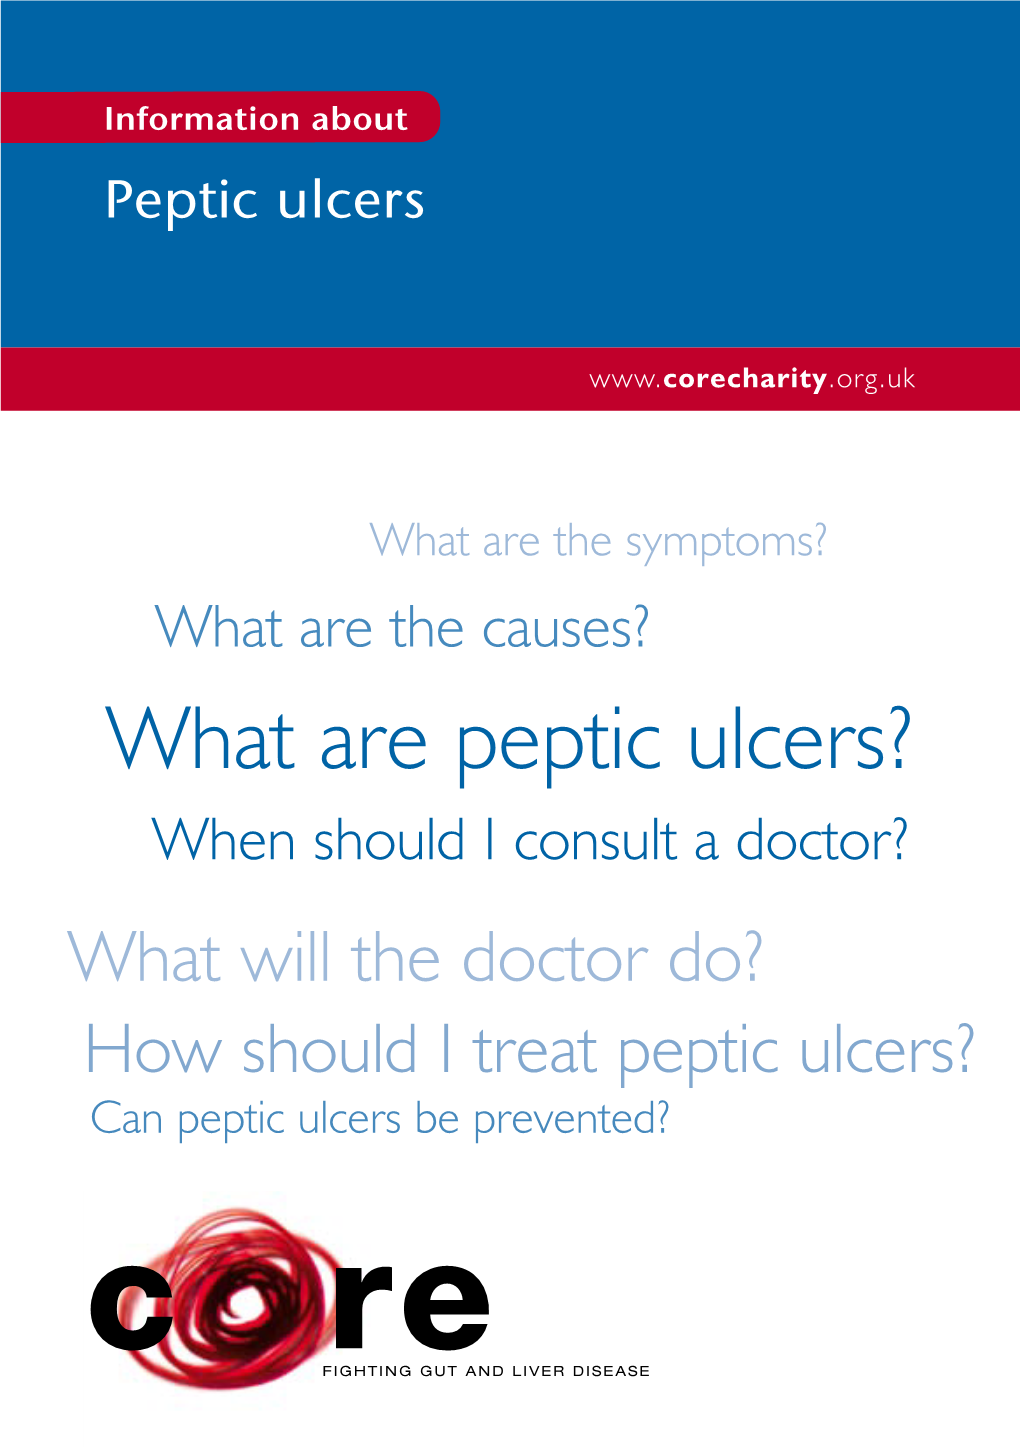 What Are Peptic Ulcers?